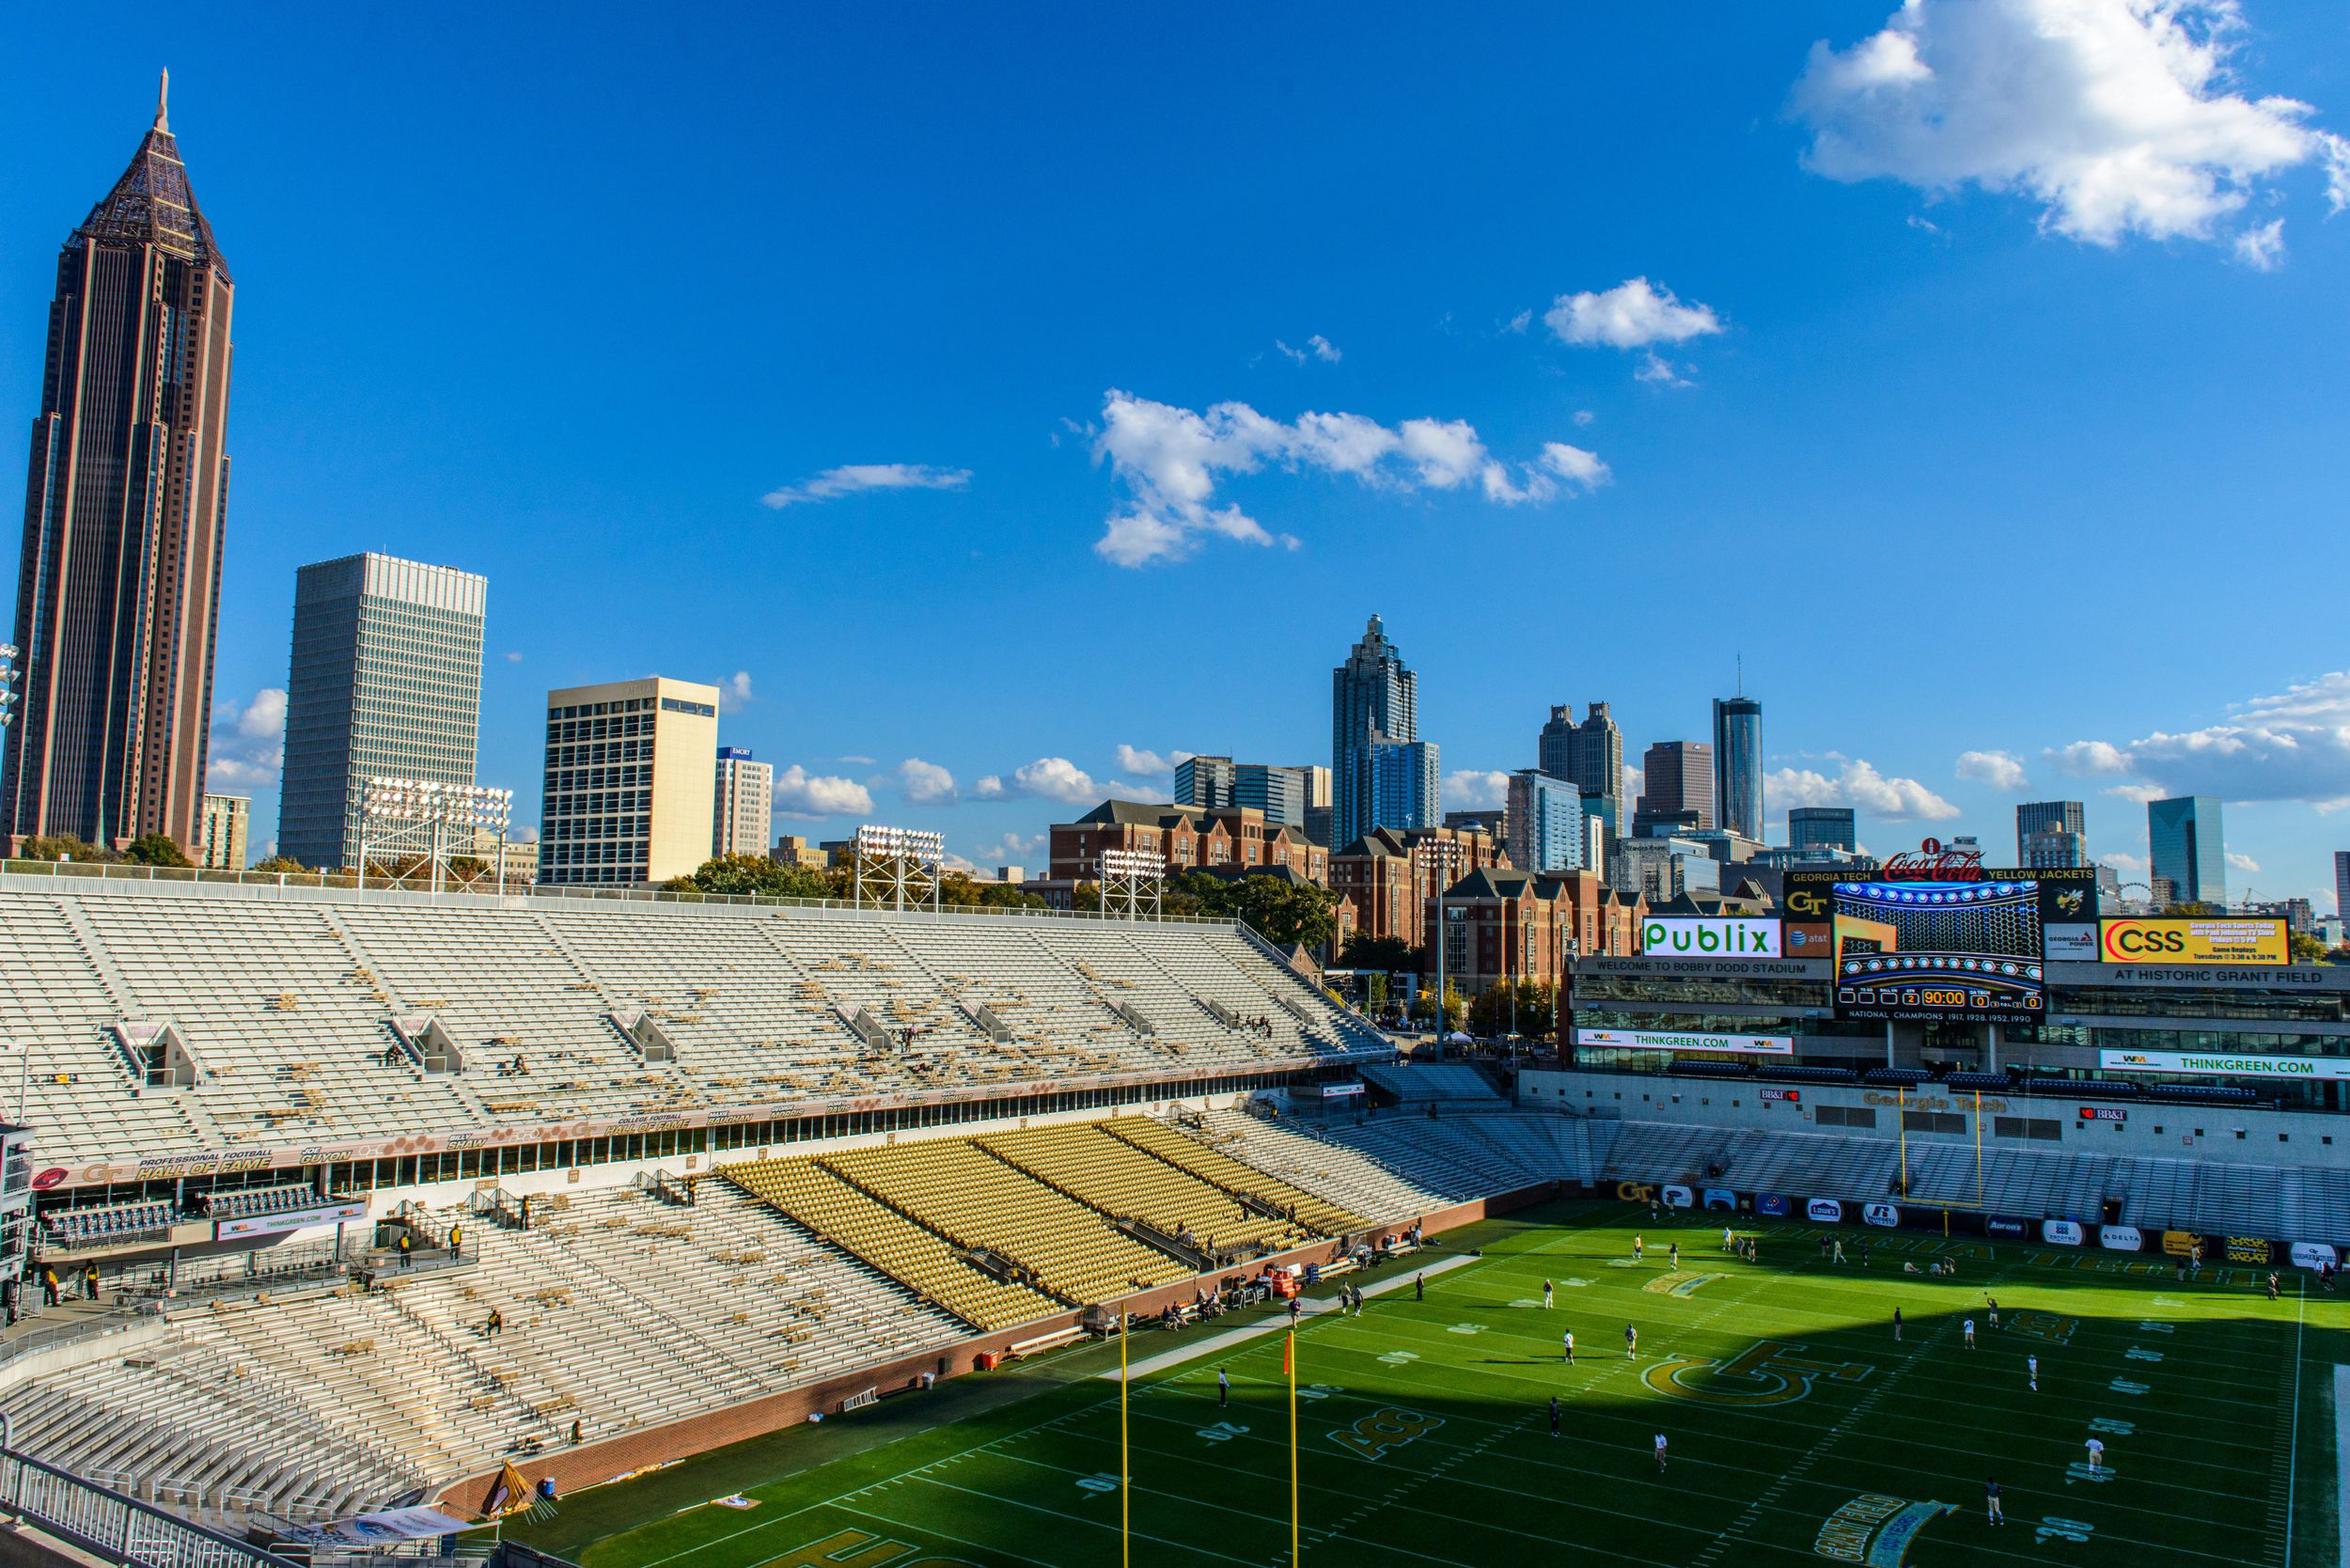 The Atlanta skyline is visible from the upper stands of Bobby Dodd Stadium prior to the game.